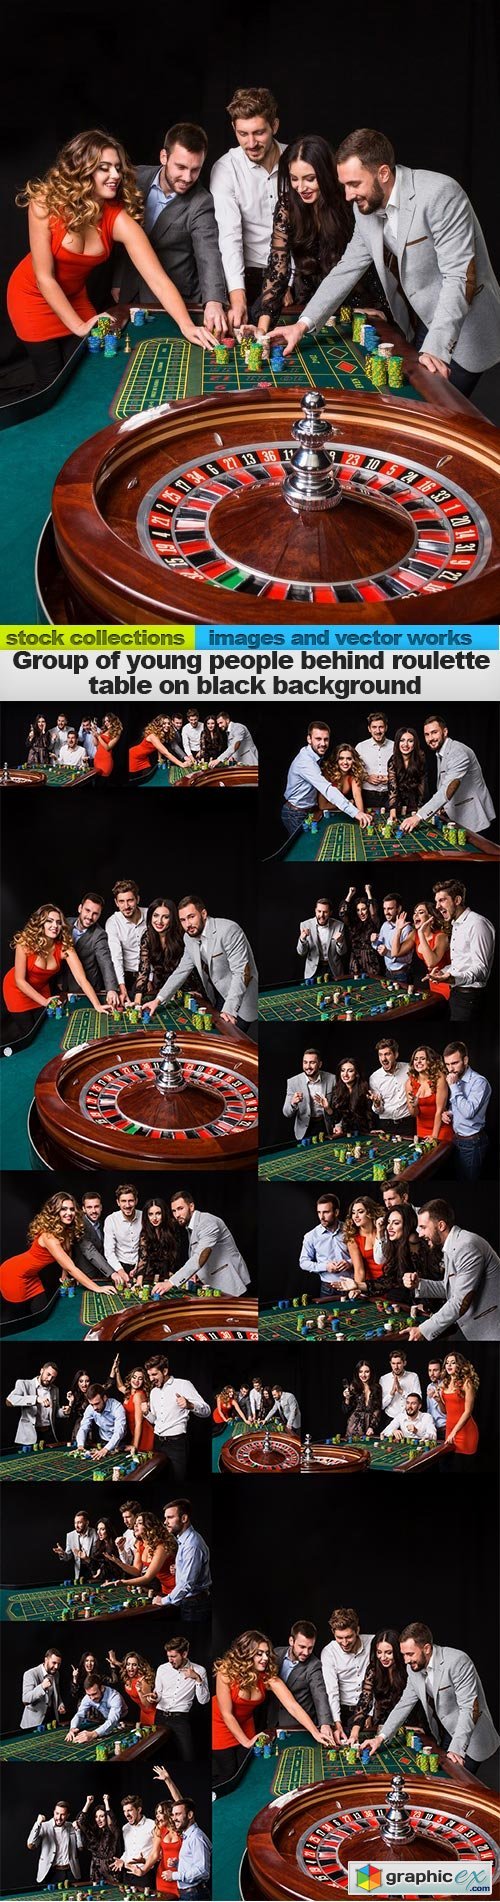 Group of young people behind roulette table on black background, 15 x UHQ JPEG